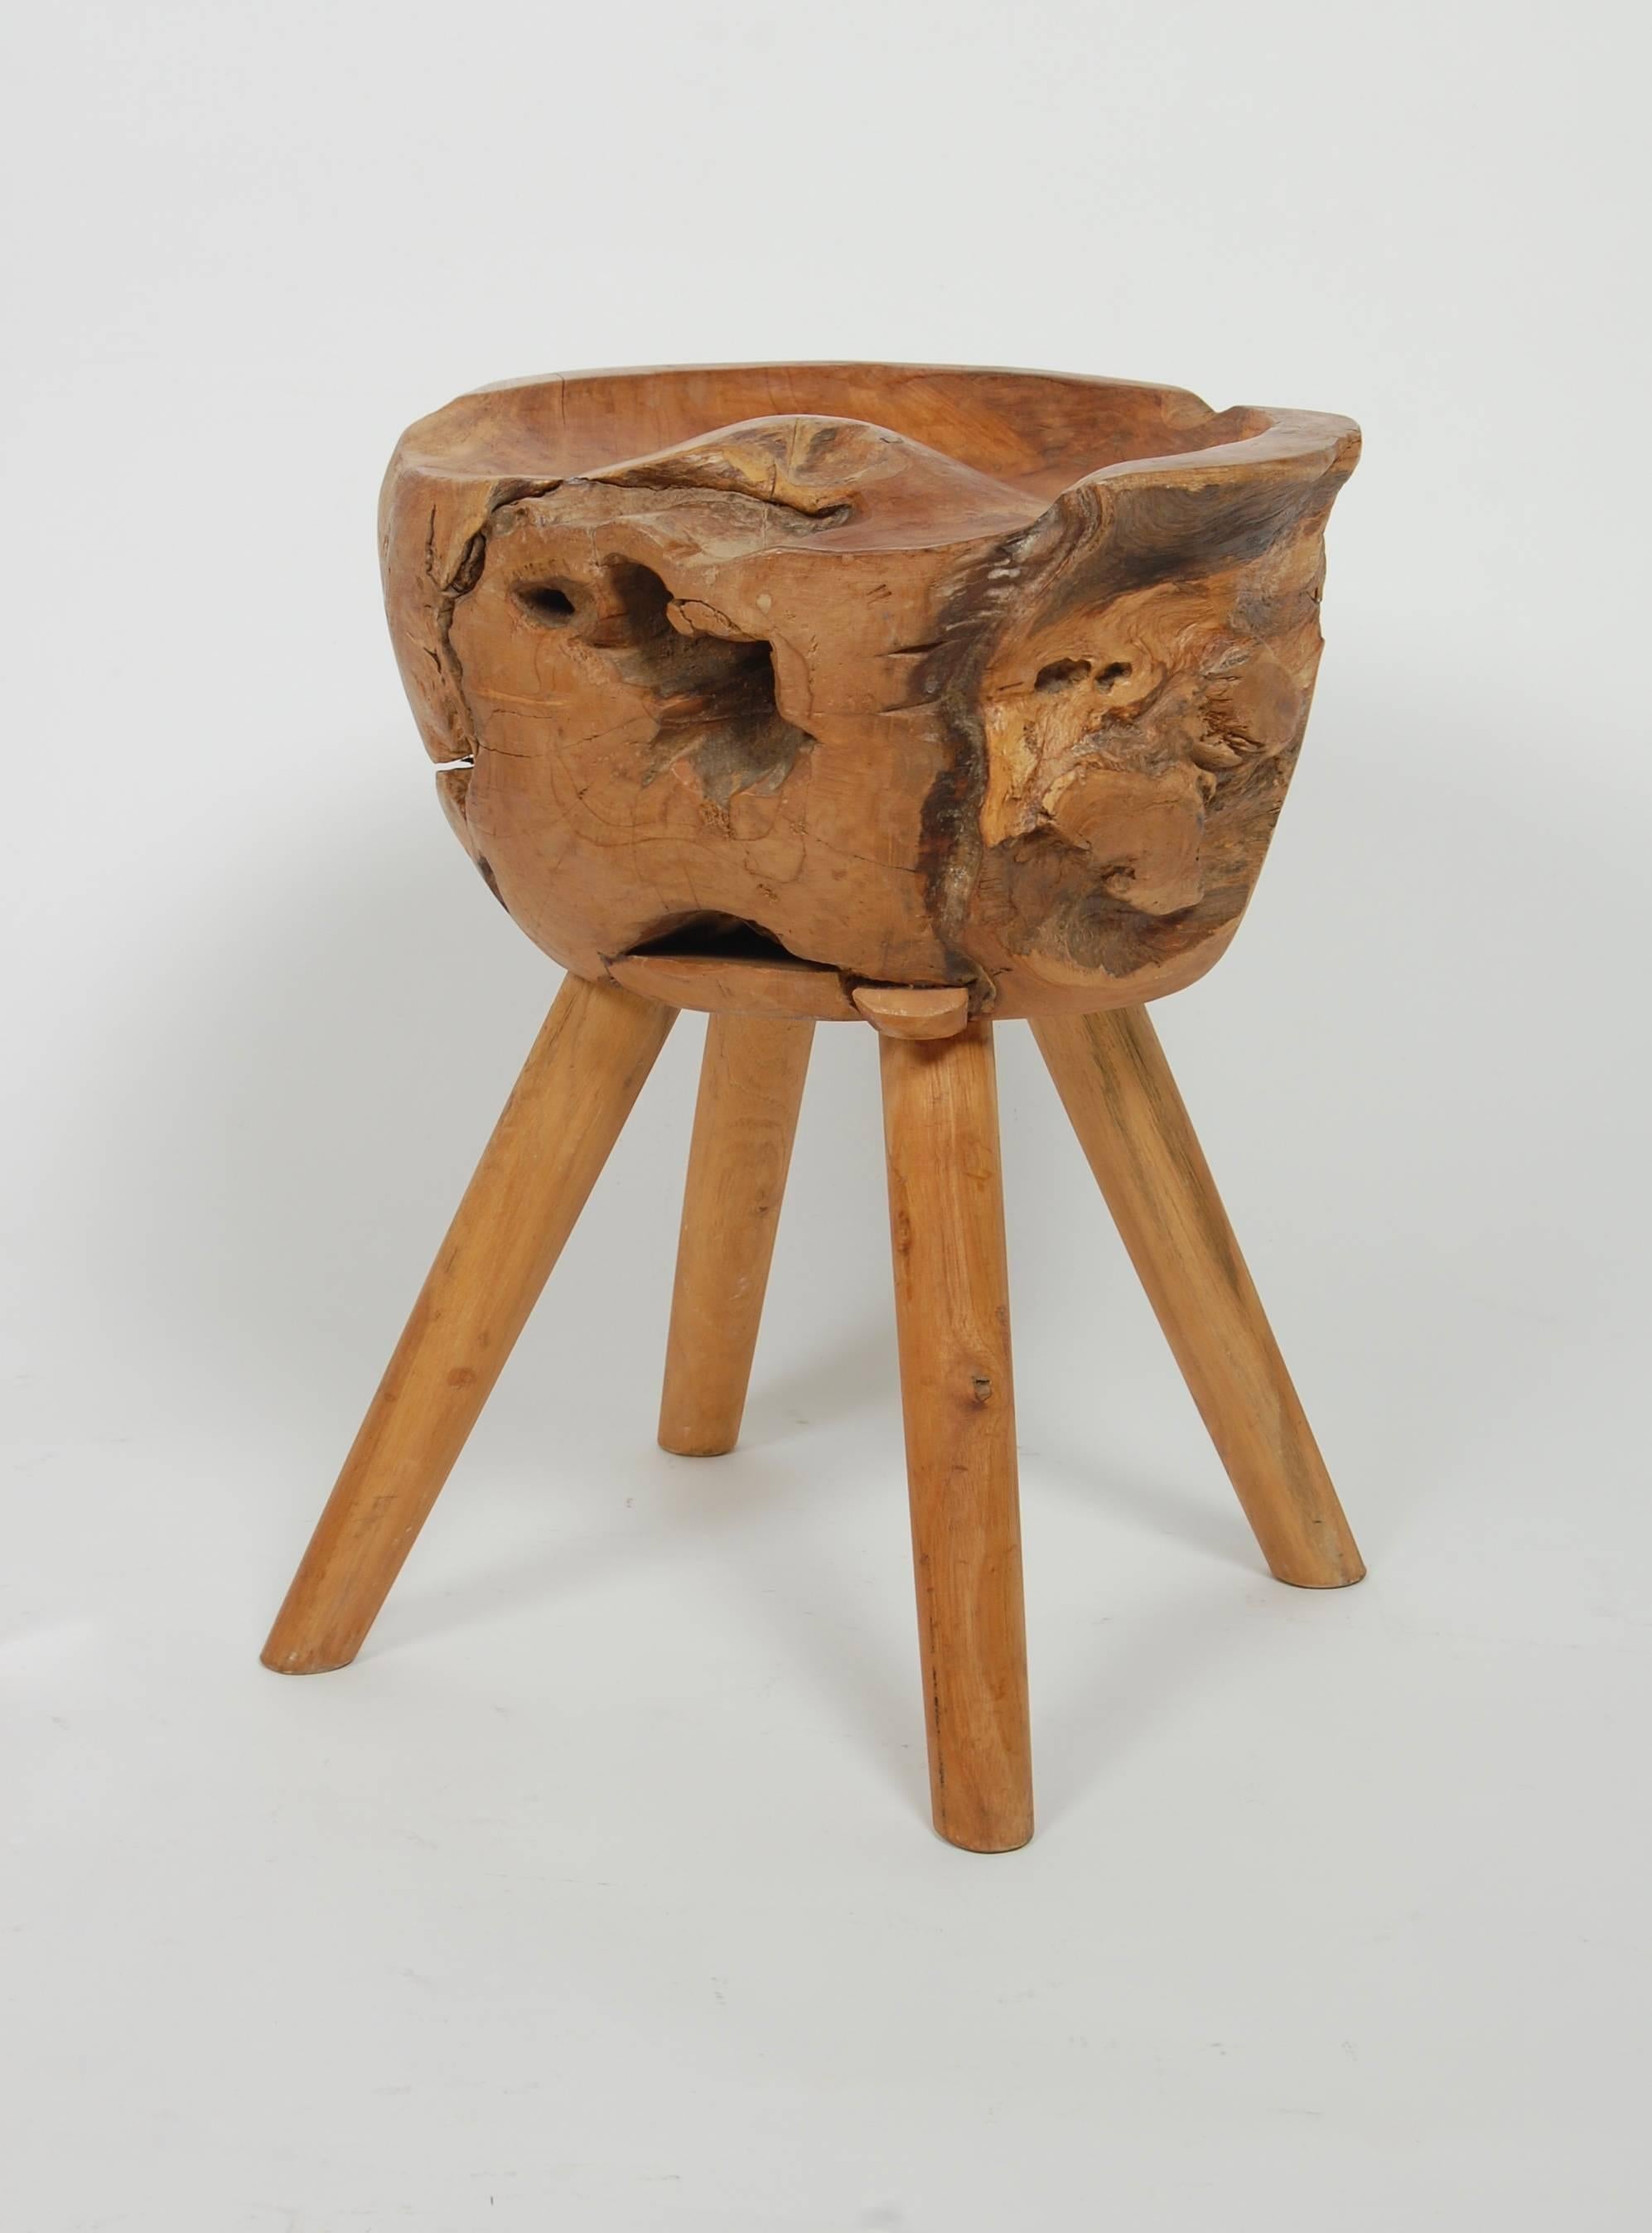 Four legged rustic stool created out of solid woods, interesting blend of shapes and textures.